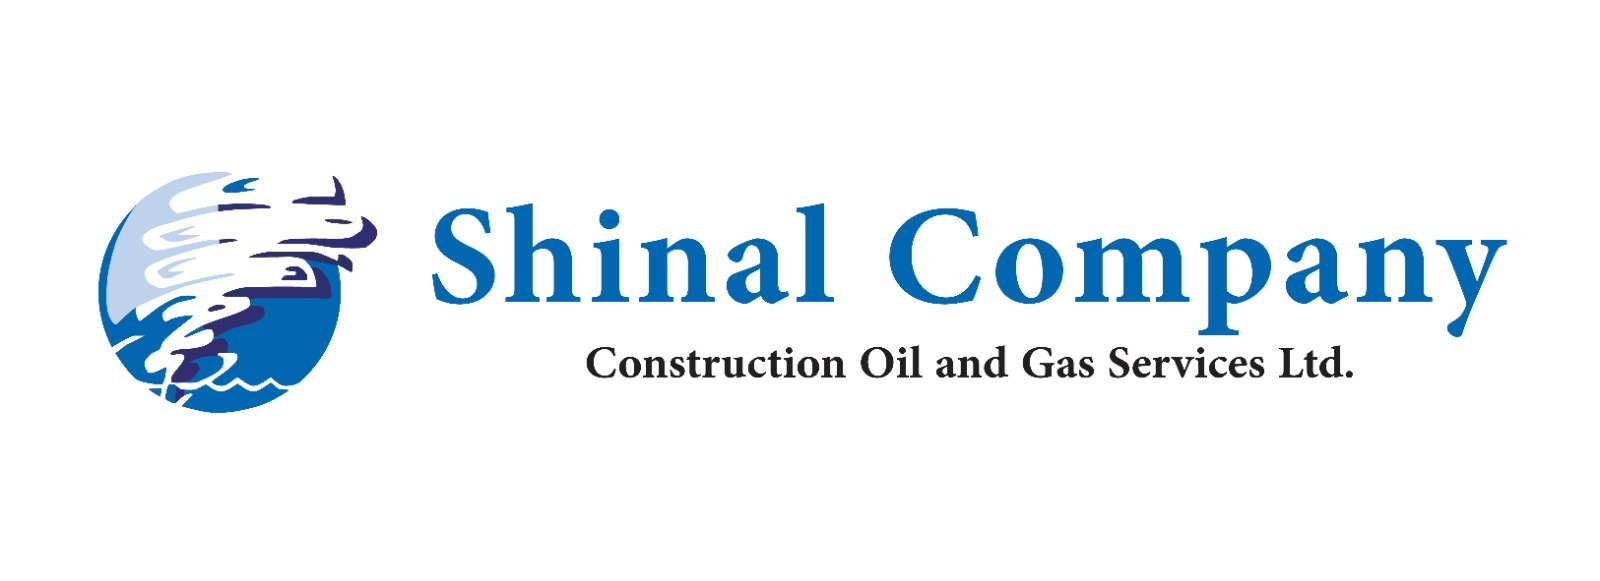 Shinal for Construction and Oil and Gas services